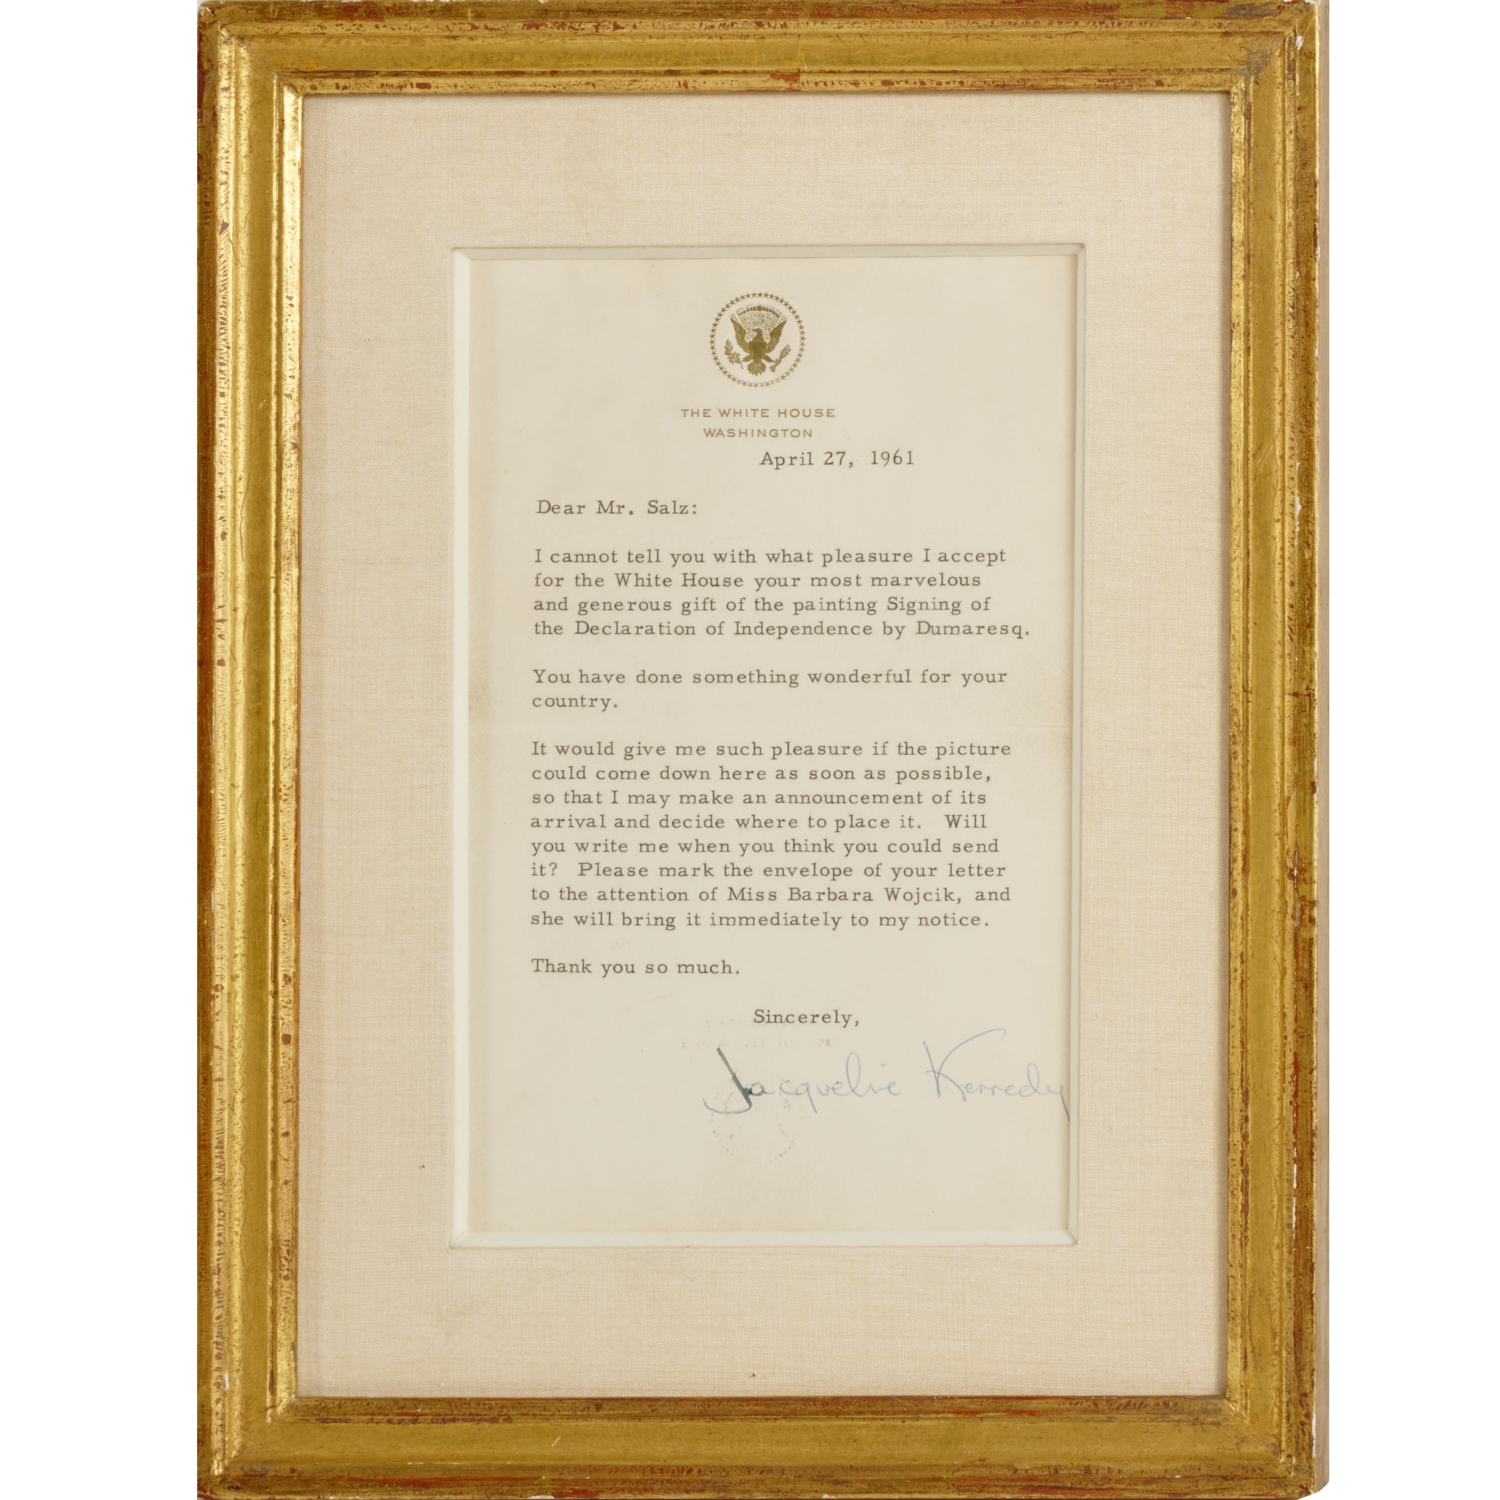 JACQUELINE KENNEDY TYPED LETTER  3c27e3